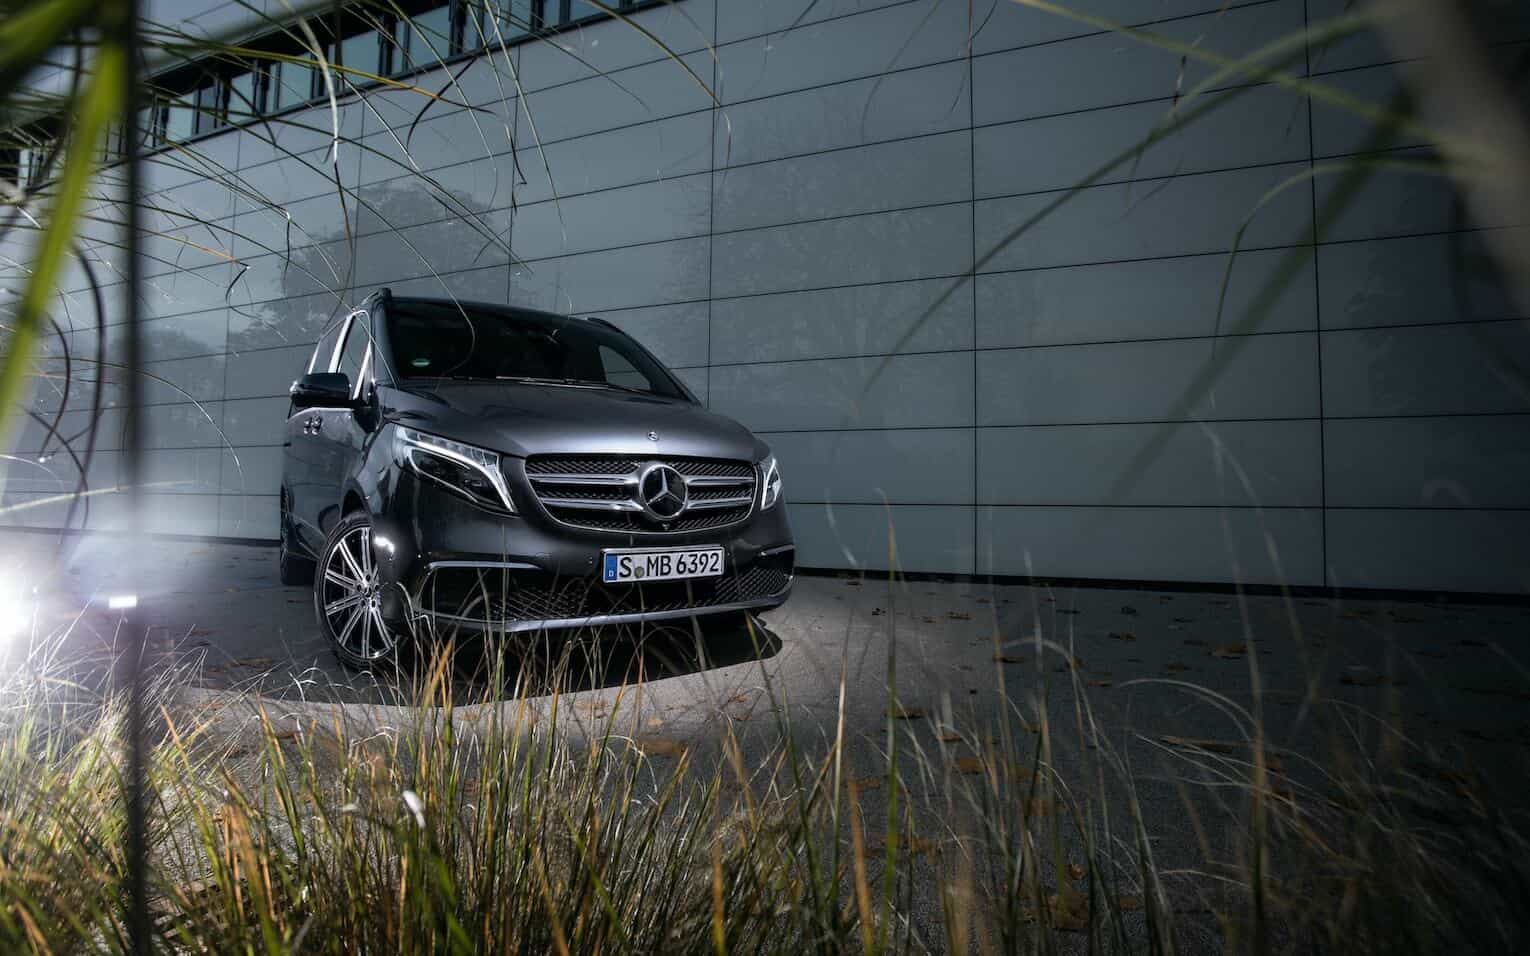 Mercedes-Benz V-Class: now more innovative with MBUX